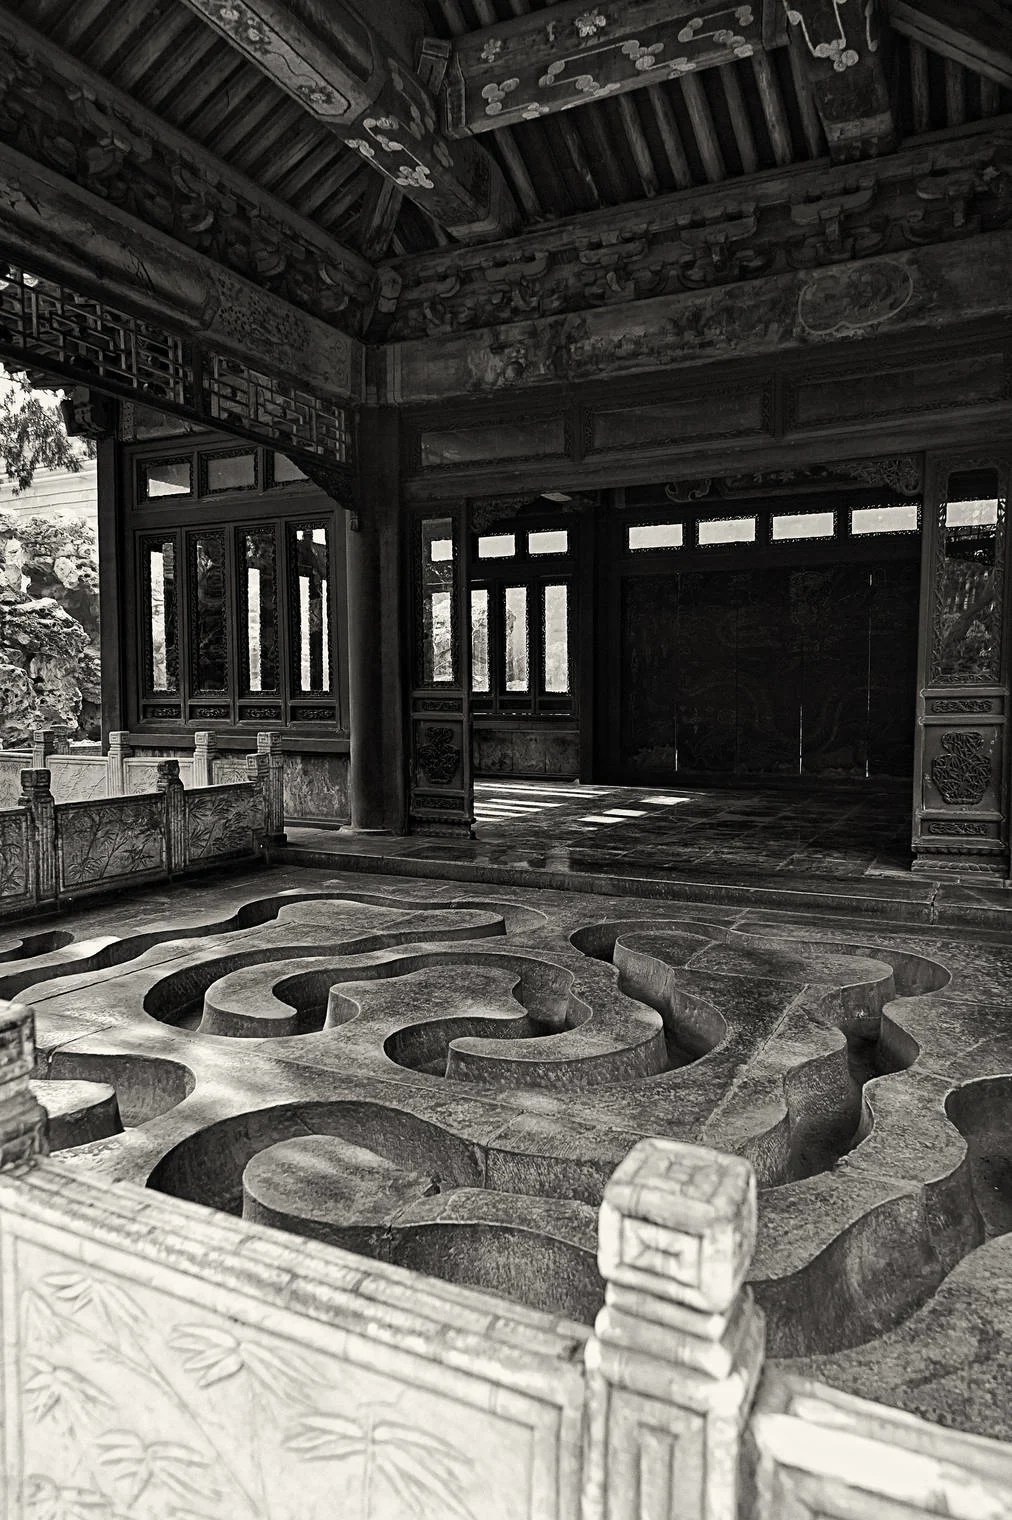 liu bei ting, pavilion of floating cups, forbidden city